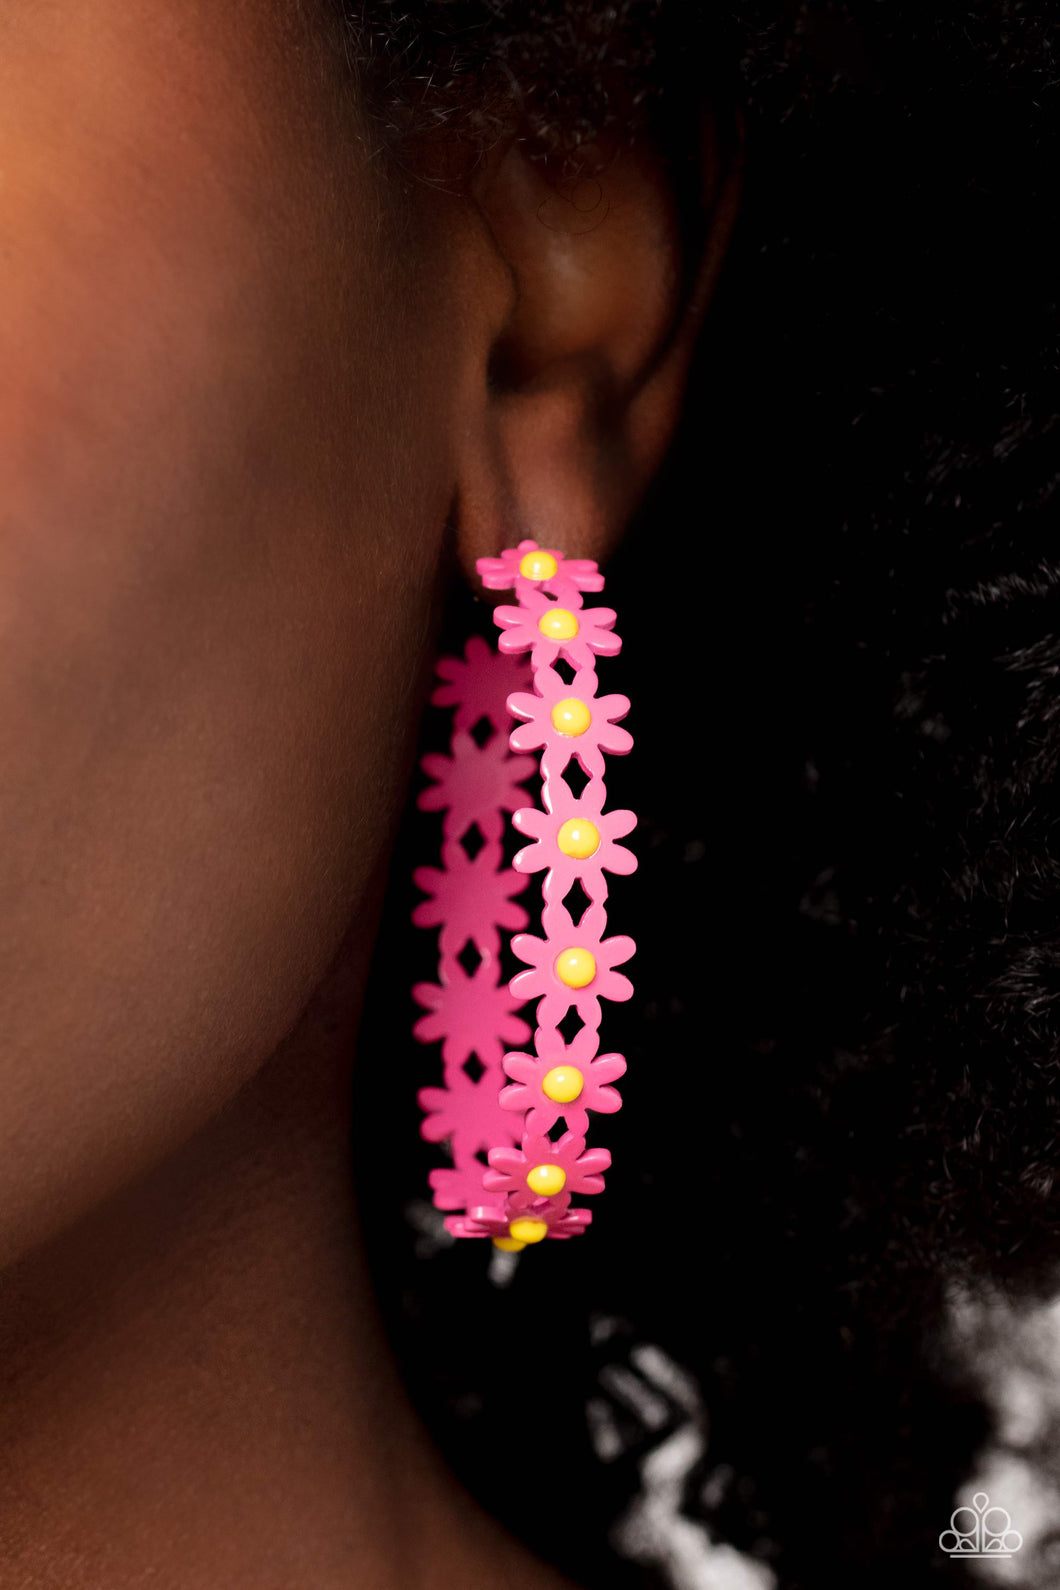 A dainty collection of hot pink daisies with yellow centers blooms into a free-spirited hoop around the ear. Earring attaches to a standard post fitting. Hoop measures approximately 2